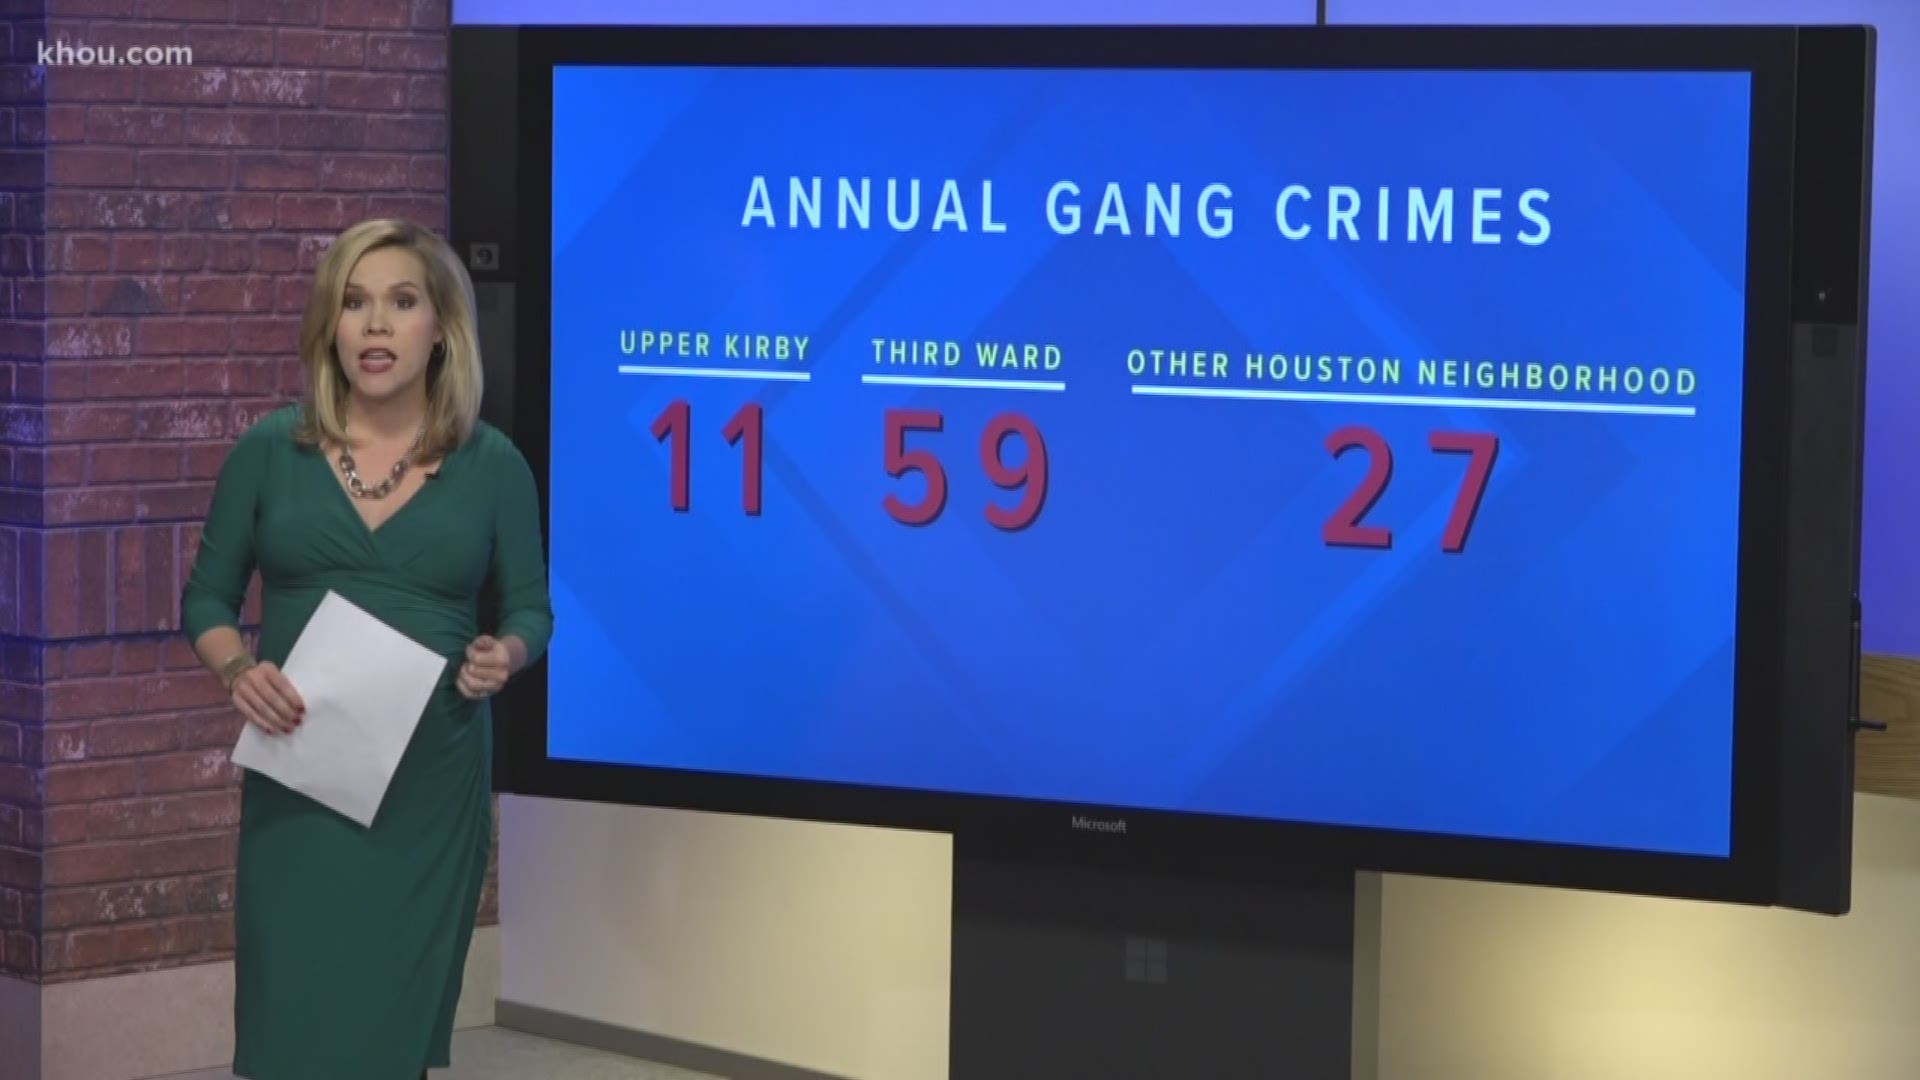 KHOU 11 Reporter Grace White takes a look at the amount of gang related crimes in Upper Kirby after an 18-year-old was fatally shot in the area. Police believe the shooting was gang-related.